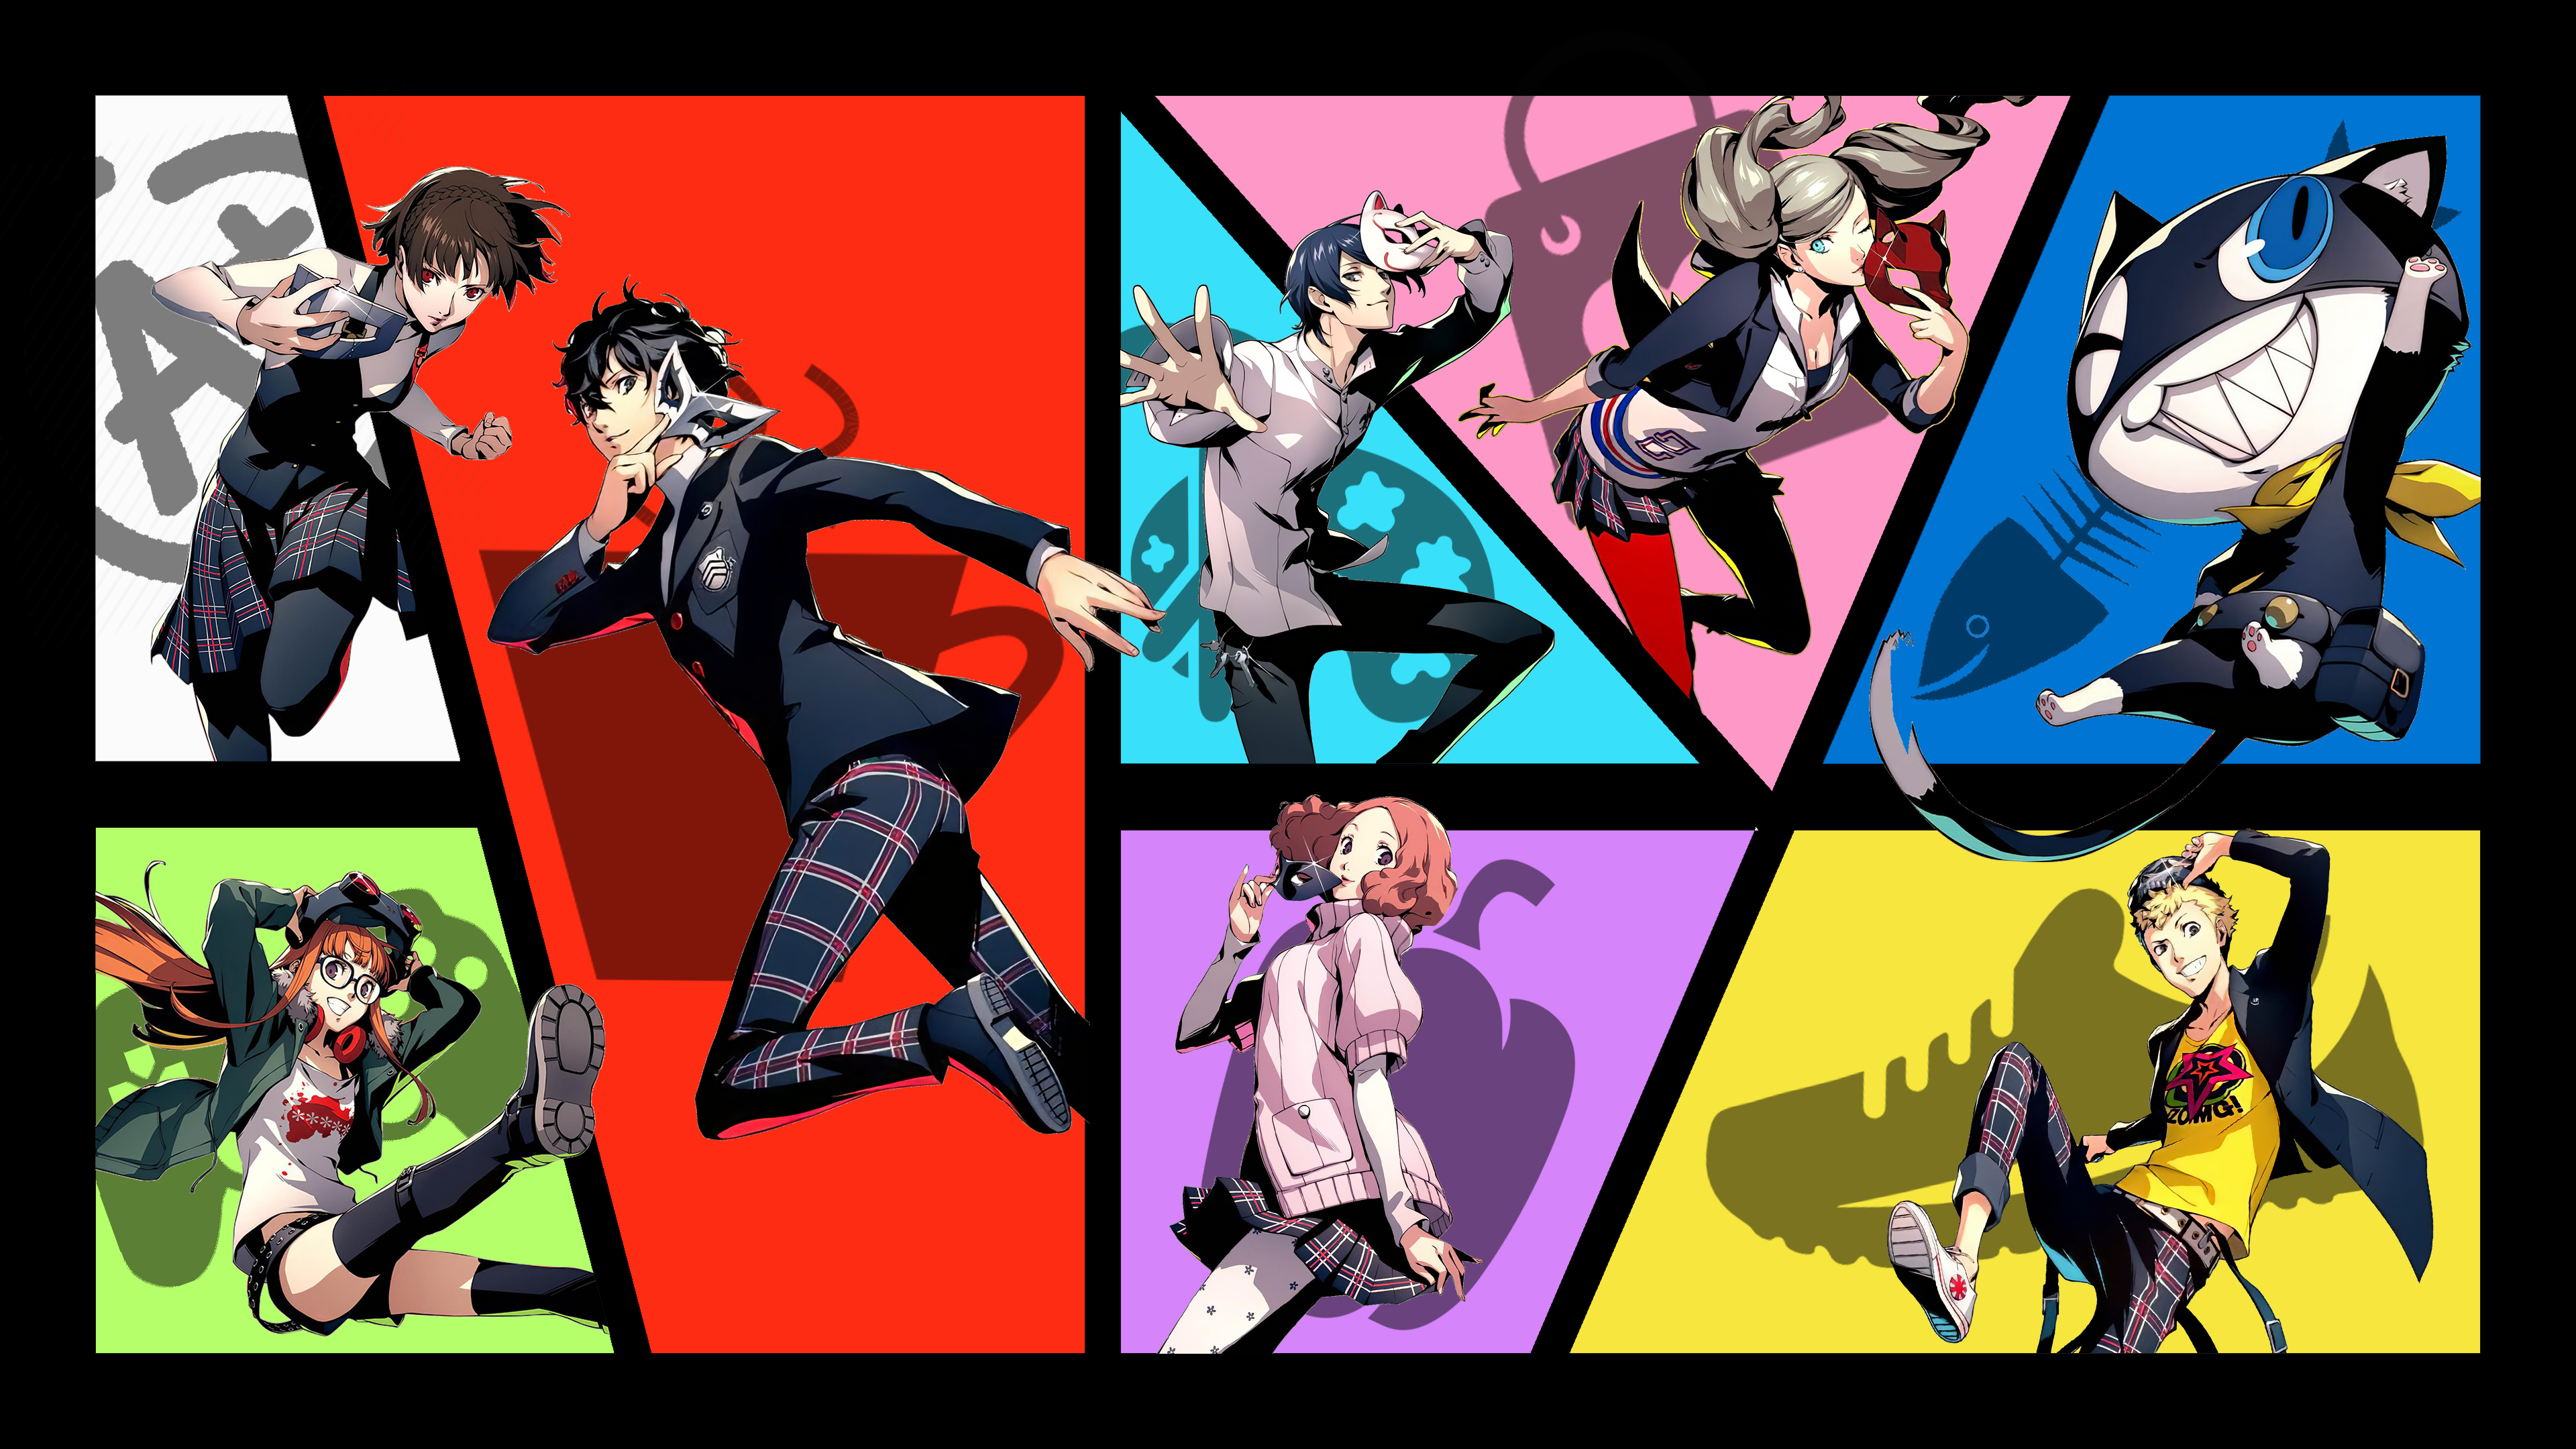 After seeing the full P5R renders for the Phantom Thieves, I decided to create a simple 4K wallpaper: Persona5